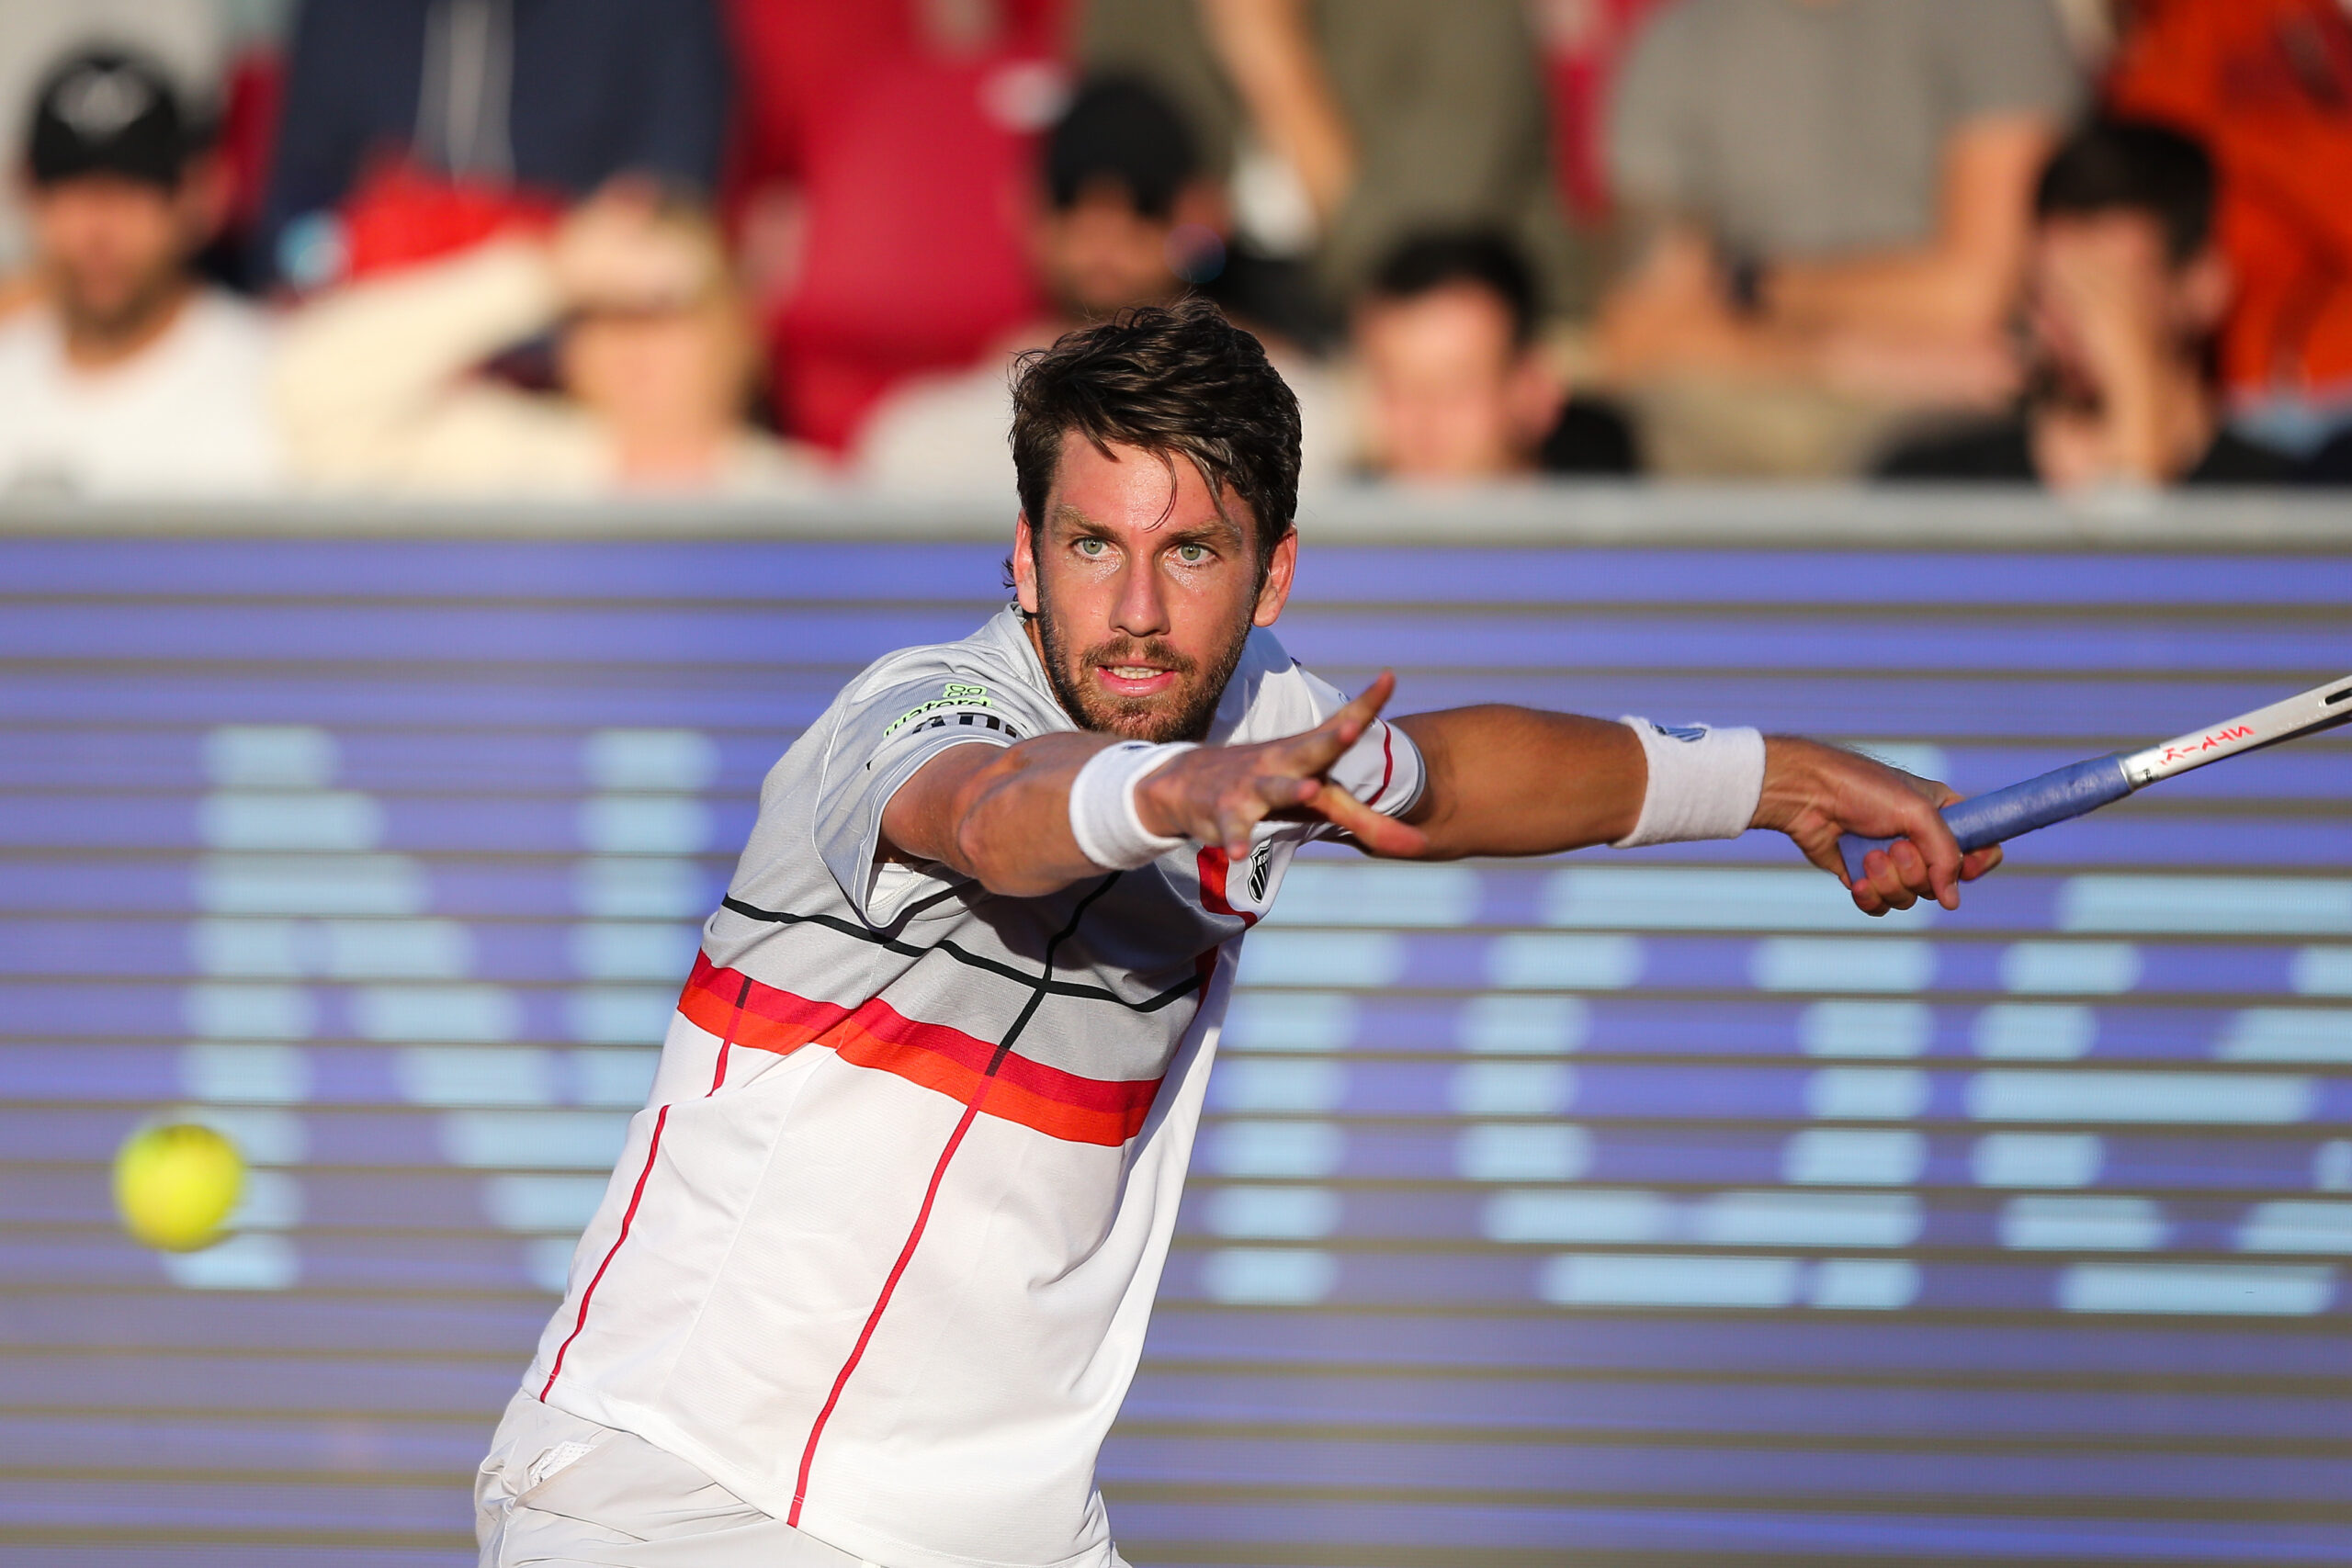 Cameron Norrie claims first win in Båstad